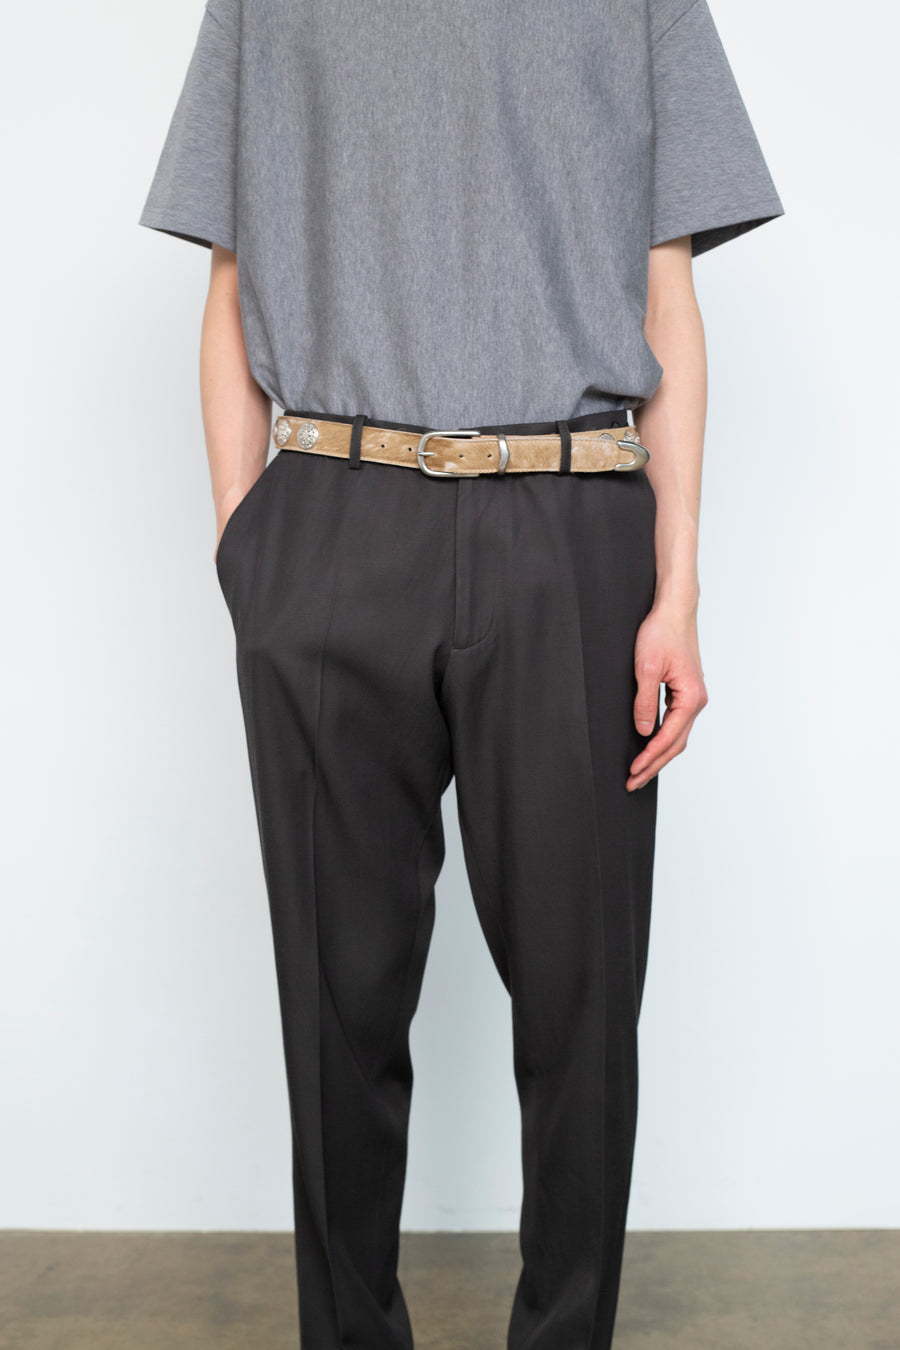 soe  Concho Belt collaborated With Children of the discordance(BEIGE)